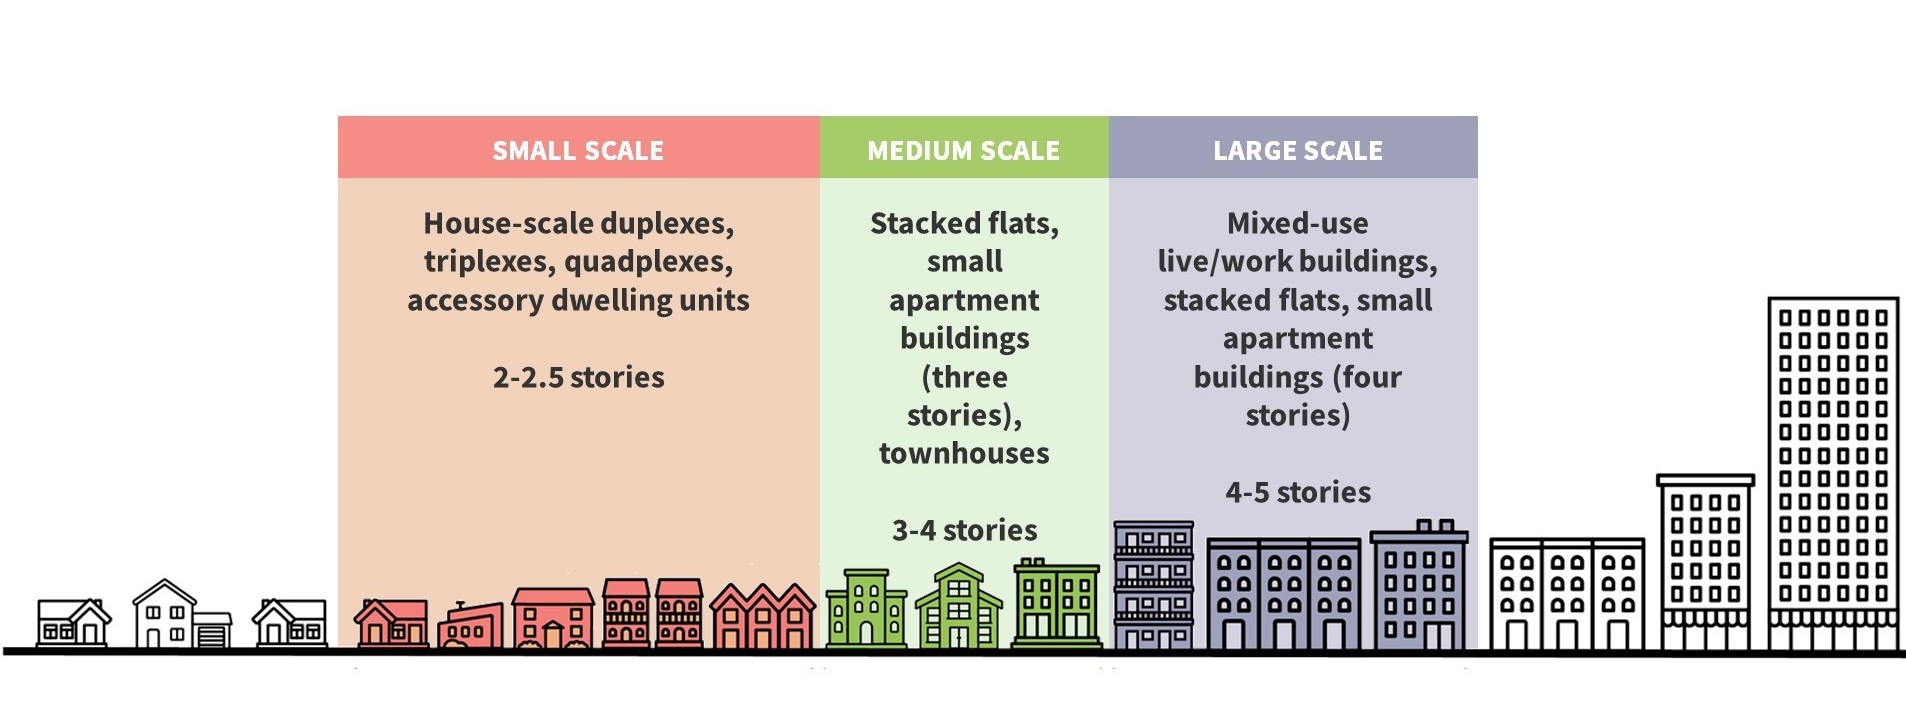 Graphic showing housing scales.Small scale: House-scale duplexes, triplexes, quadplexes, accessory dwelling units 2-2.5 stories. Medium scale: Stacked flats apartment buildings (three stories), townhouses 3-4 stories. Large scale: Mixed-use Live/work buildings, stacked flats, small apartment buildings (four stories) 4-5 stories